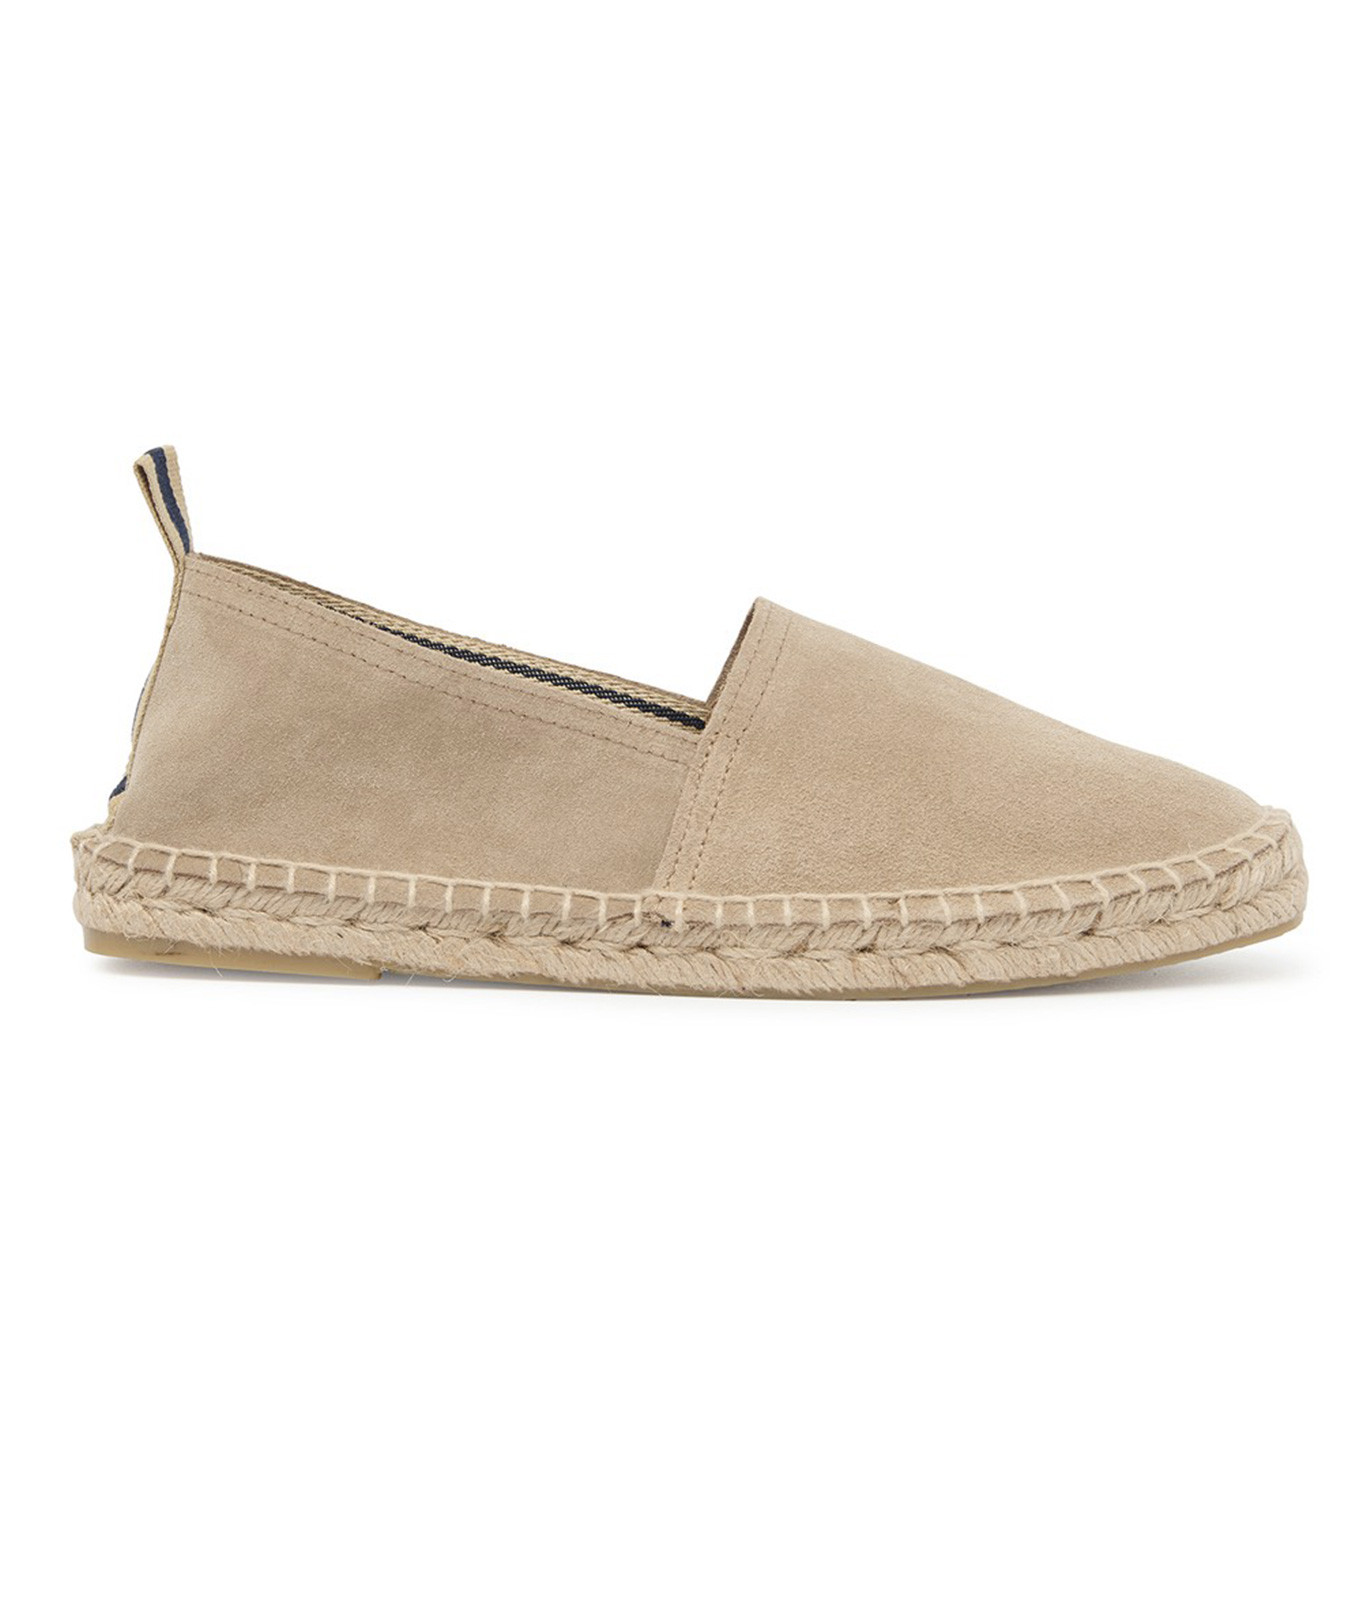 Leather crust espadrilles for mens